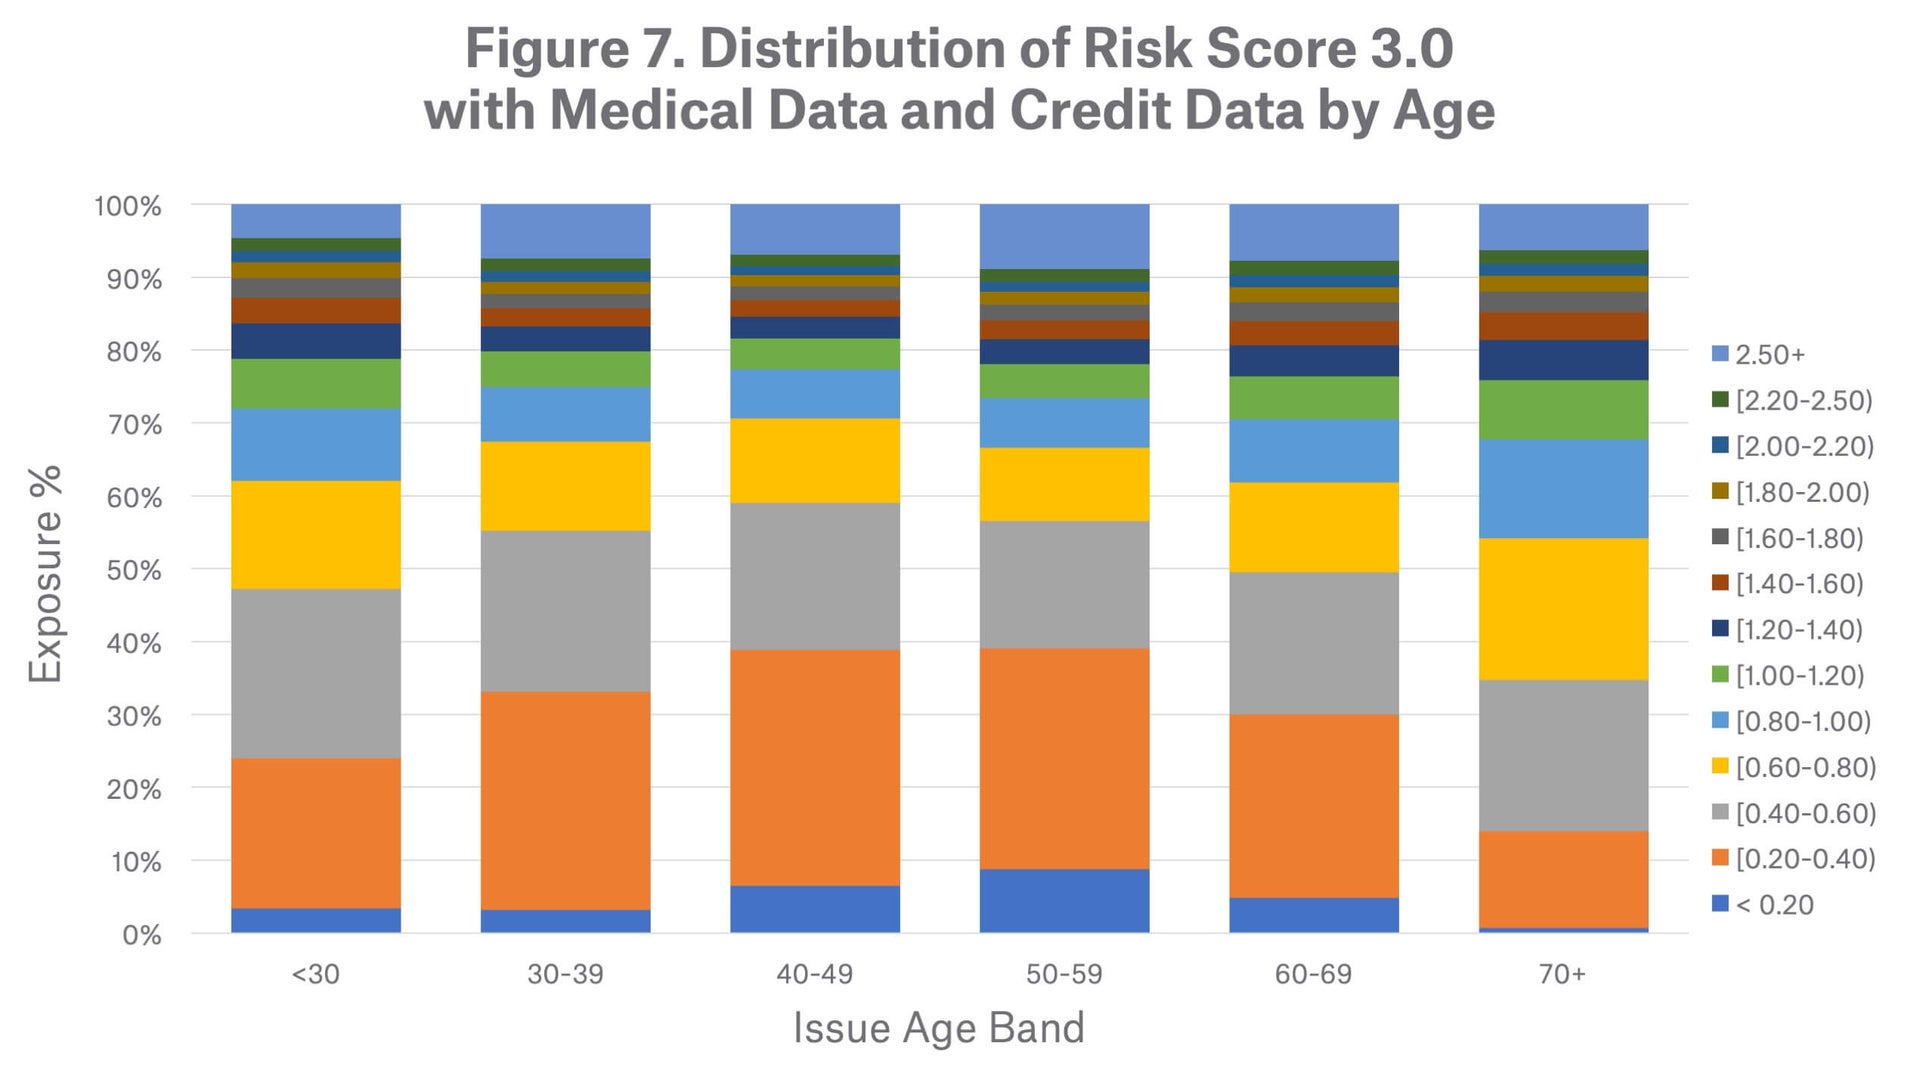 Figure-7.-Distribution-of-Risk-Score-3.0-with-Medical-and-Credit-Data-by-Age.jpg